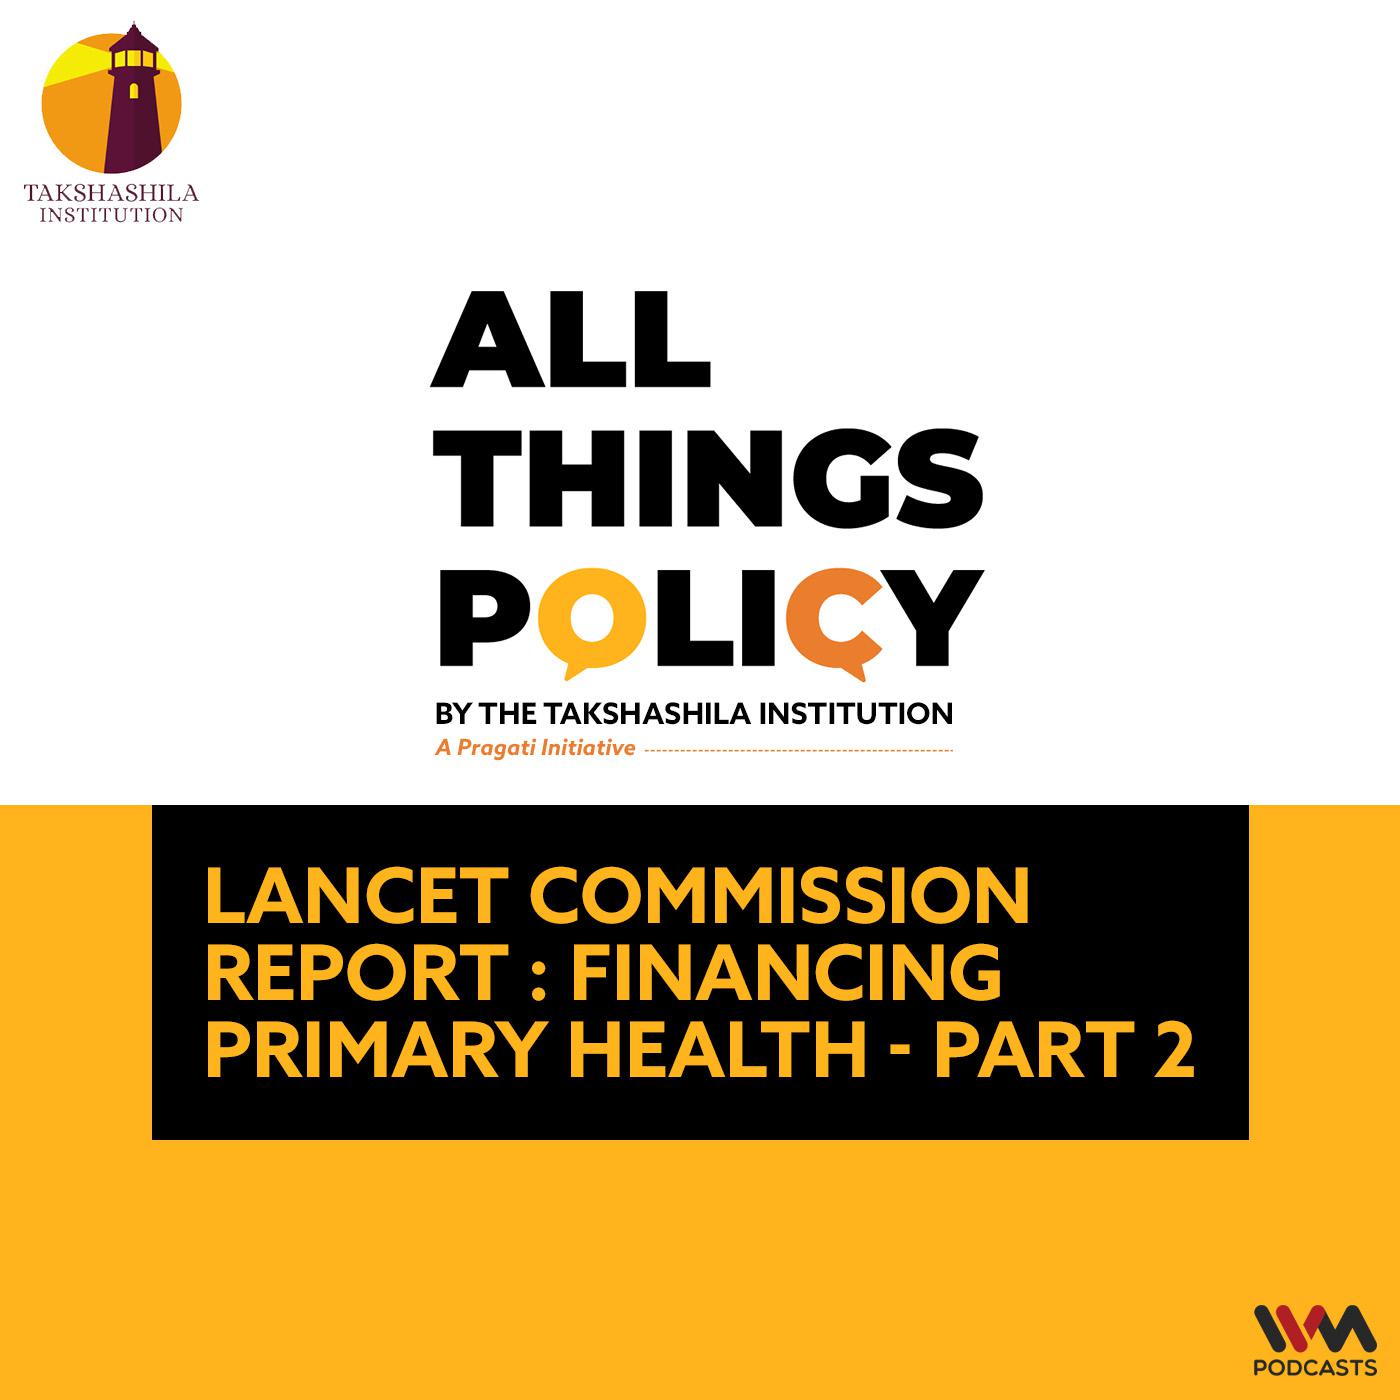 Lancet Commission Report : Financing Primary Health - Part 2